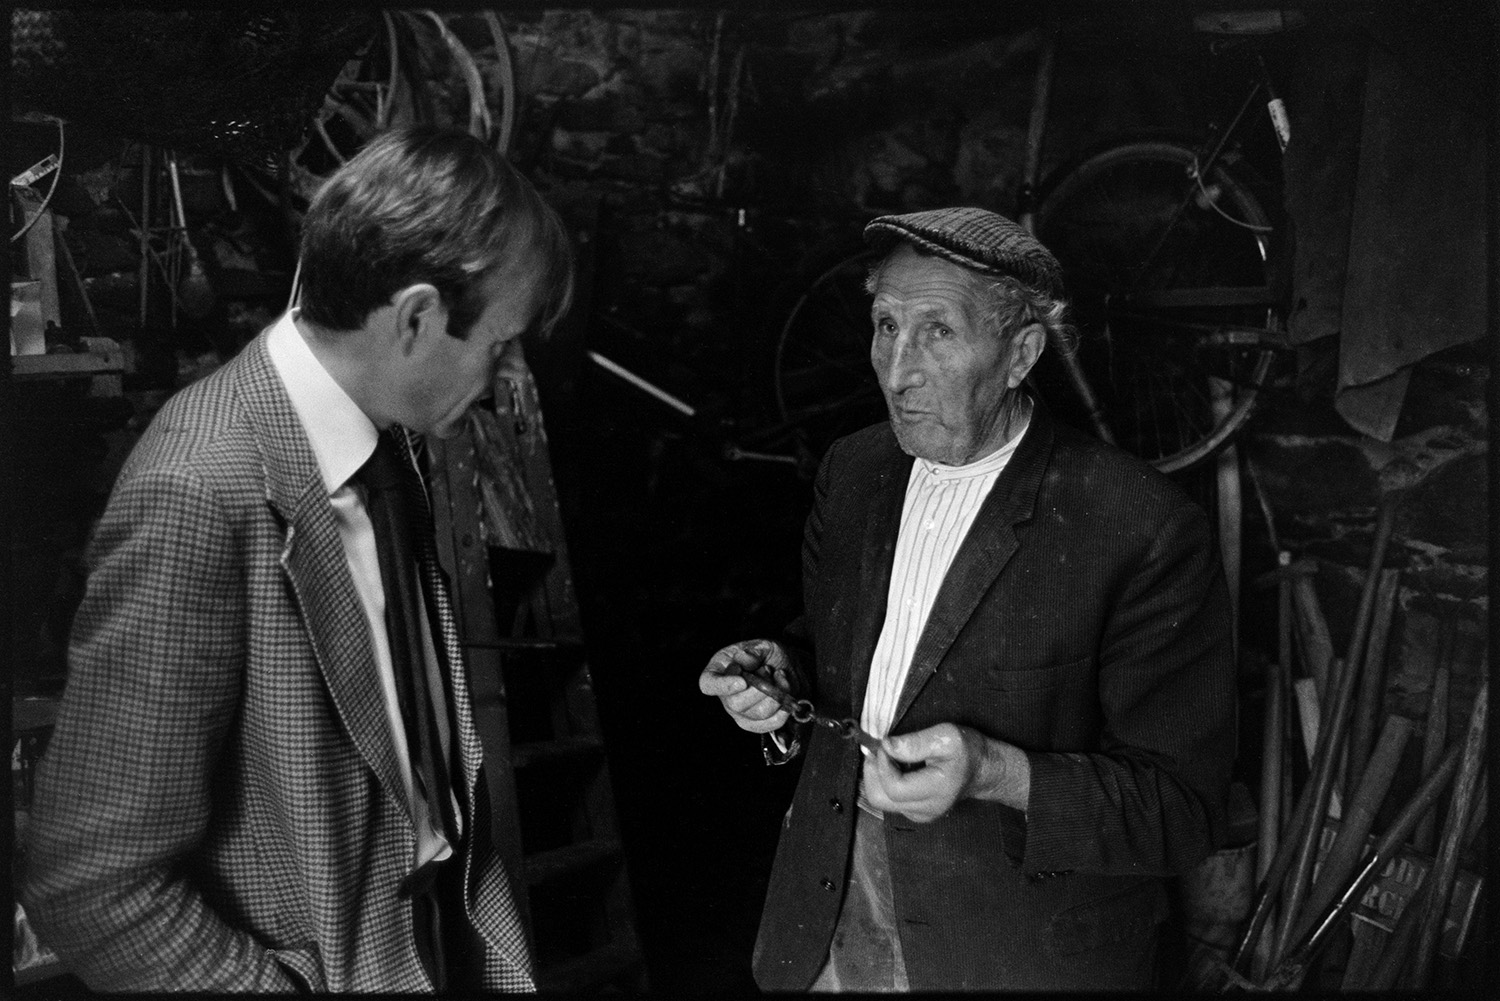 Doctor on rounds talking to man patient outside his house.
[Doctor Richard Westcott talking to Edward Cotsford in a shed at his house at Charles Bottom, South Molton. Various tools and a wooden ladder can be seen in the shed.]